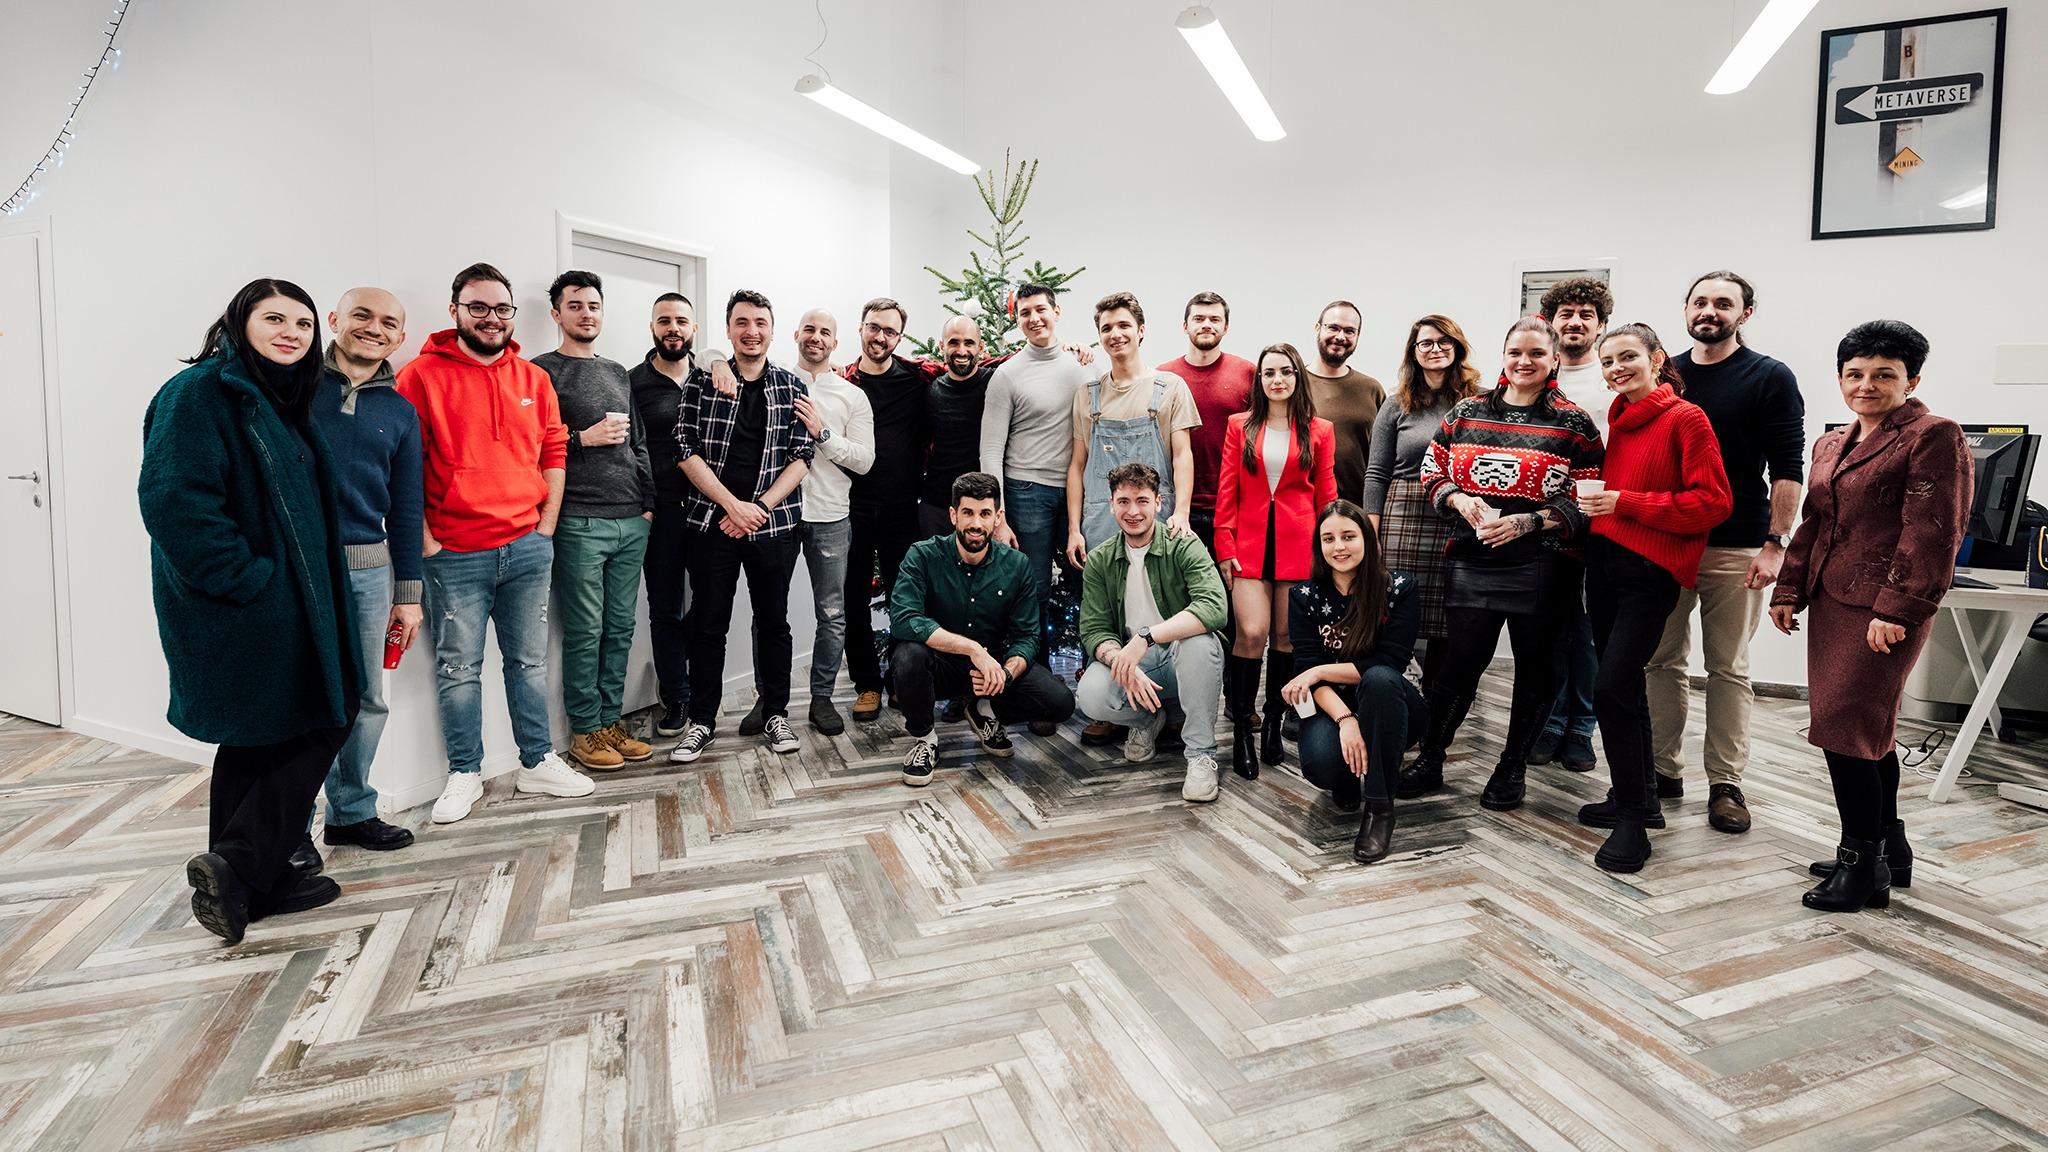 QED: The Cowork Timisoara success story - from start-ups to leaders in Web technologies3